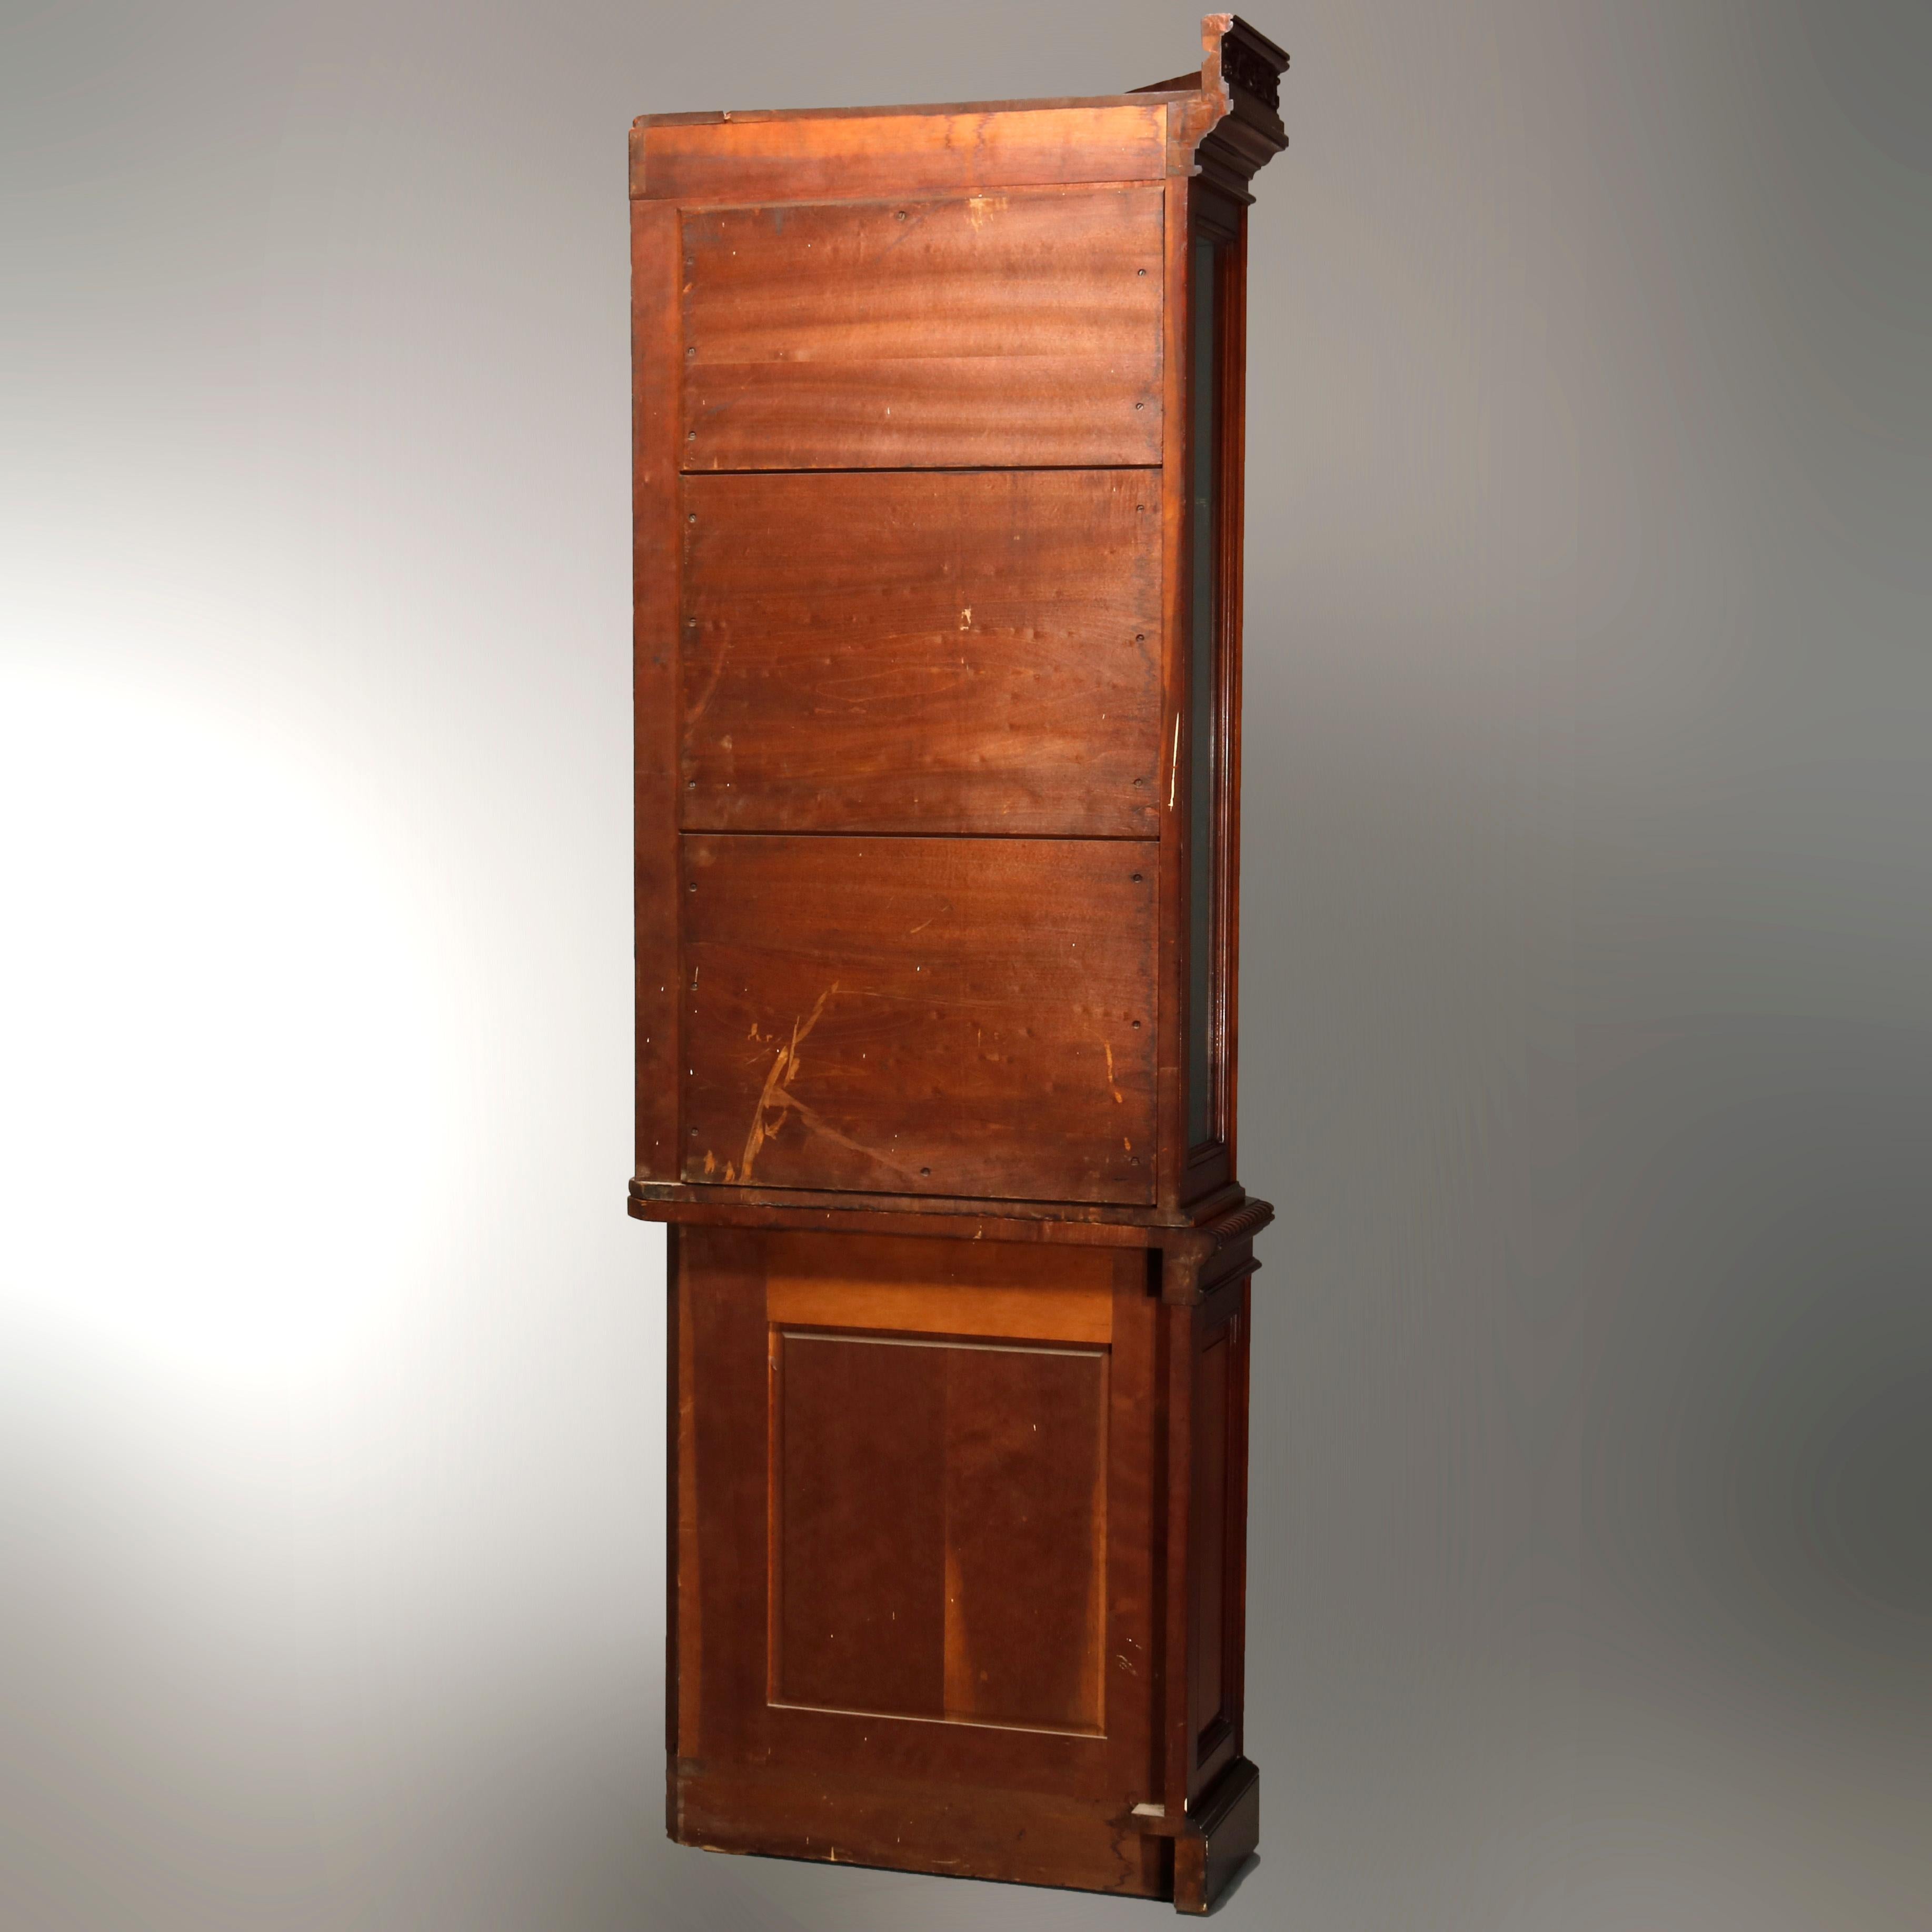 Antique Aesthetic Movement Carved Cherry Faceted & Mirrored Corner Cabinet c1890 For Sale 8